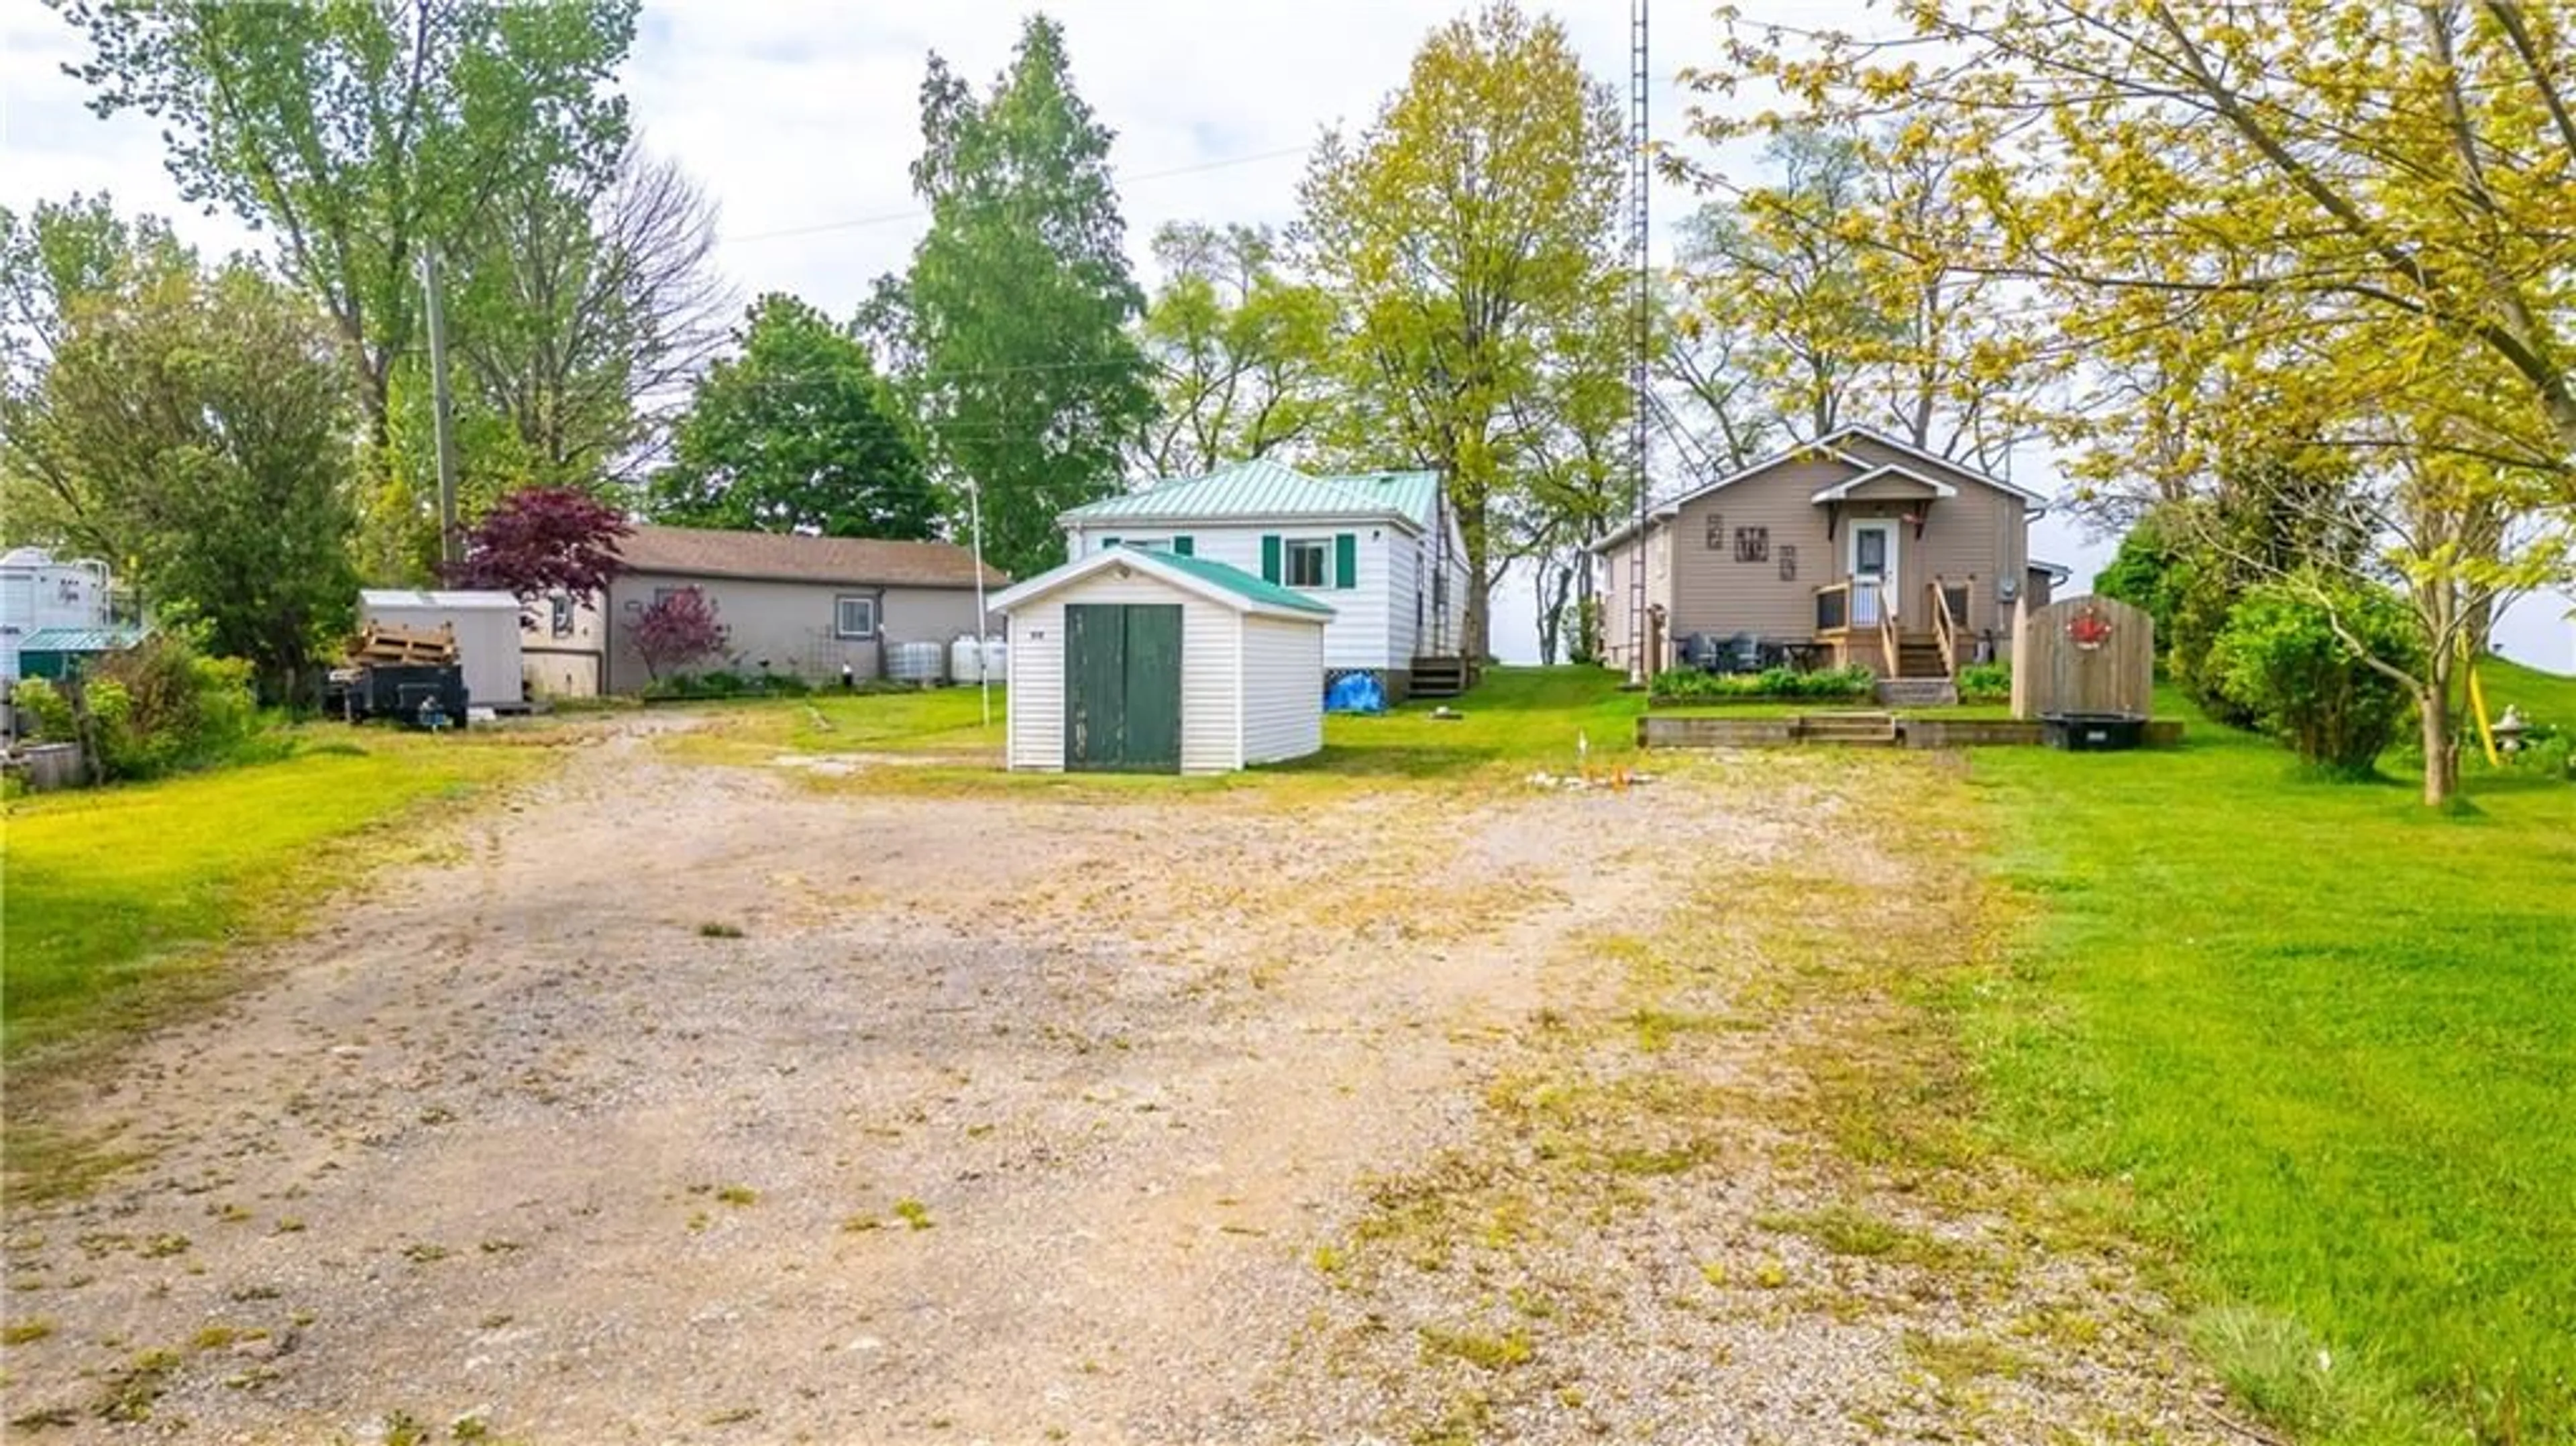 Cottage for 618 South Coast Dr, Nanticoke Ontario N0A 1L0